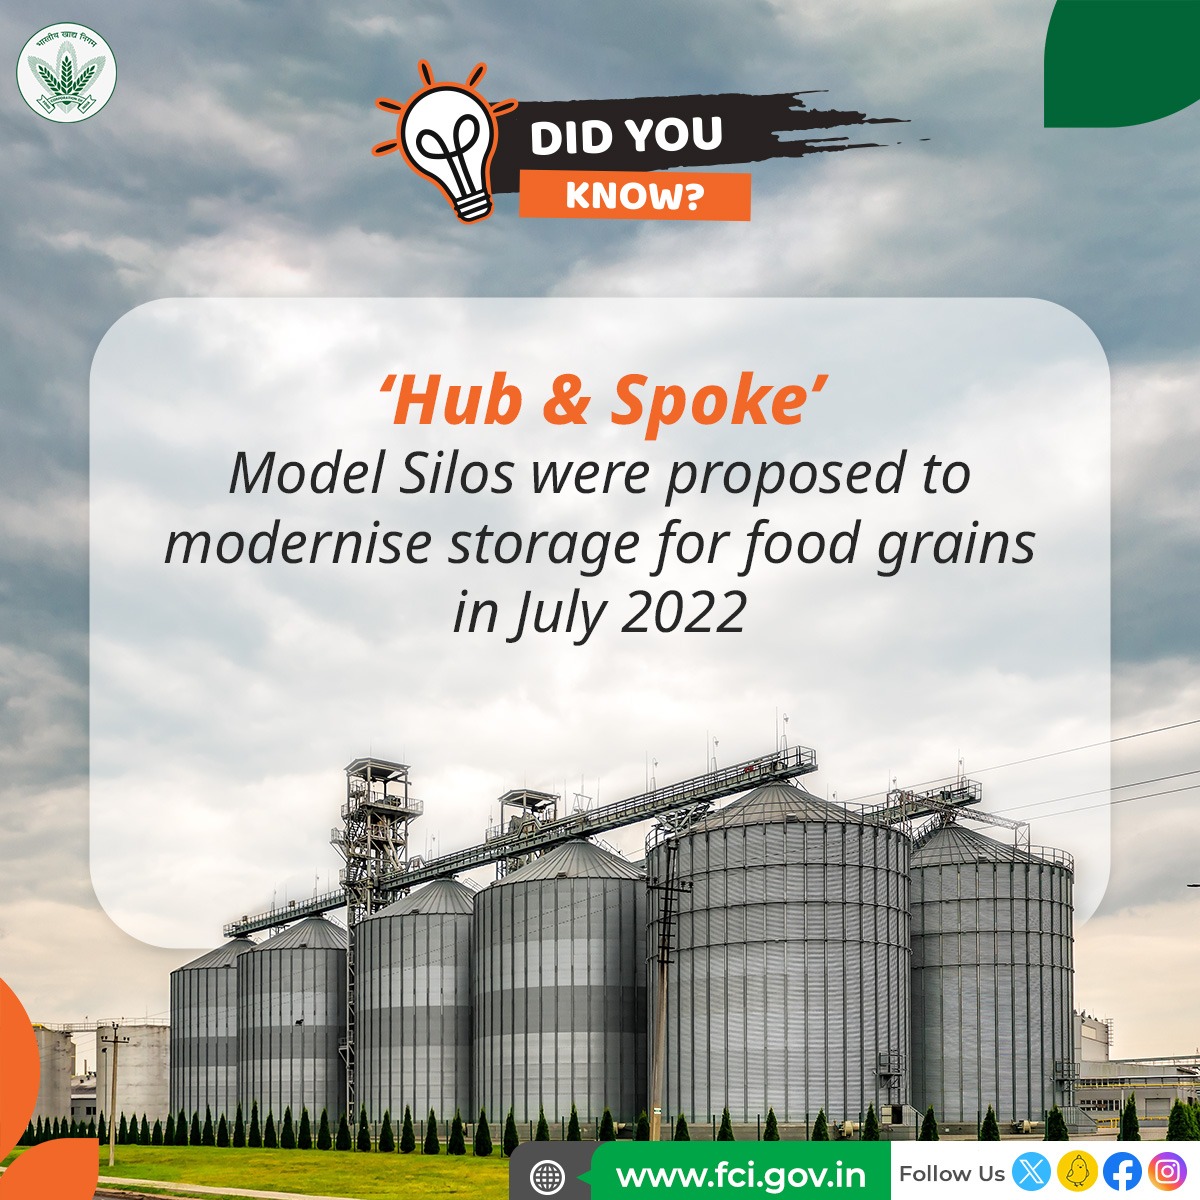 FCI's modern Silos are transforming the way food grains are stored. Based on the 'Hub & Spoke Model', these Silos are being constructed in 3 phases to be a game-changer in the #storage & movement operations of FCI🌾 #FCI